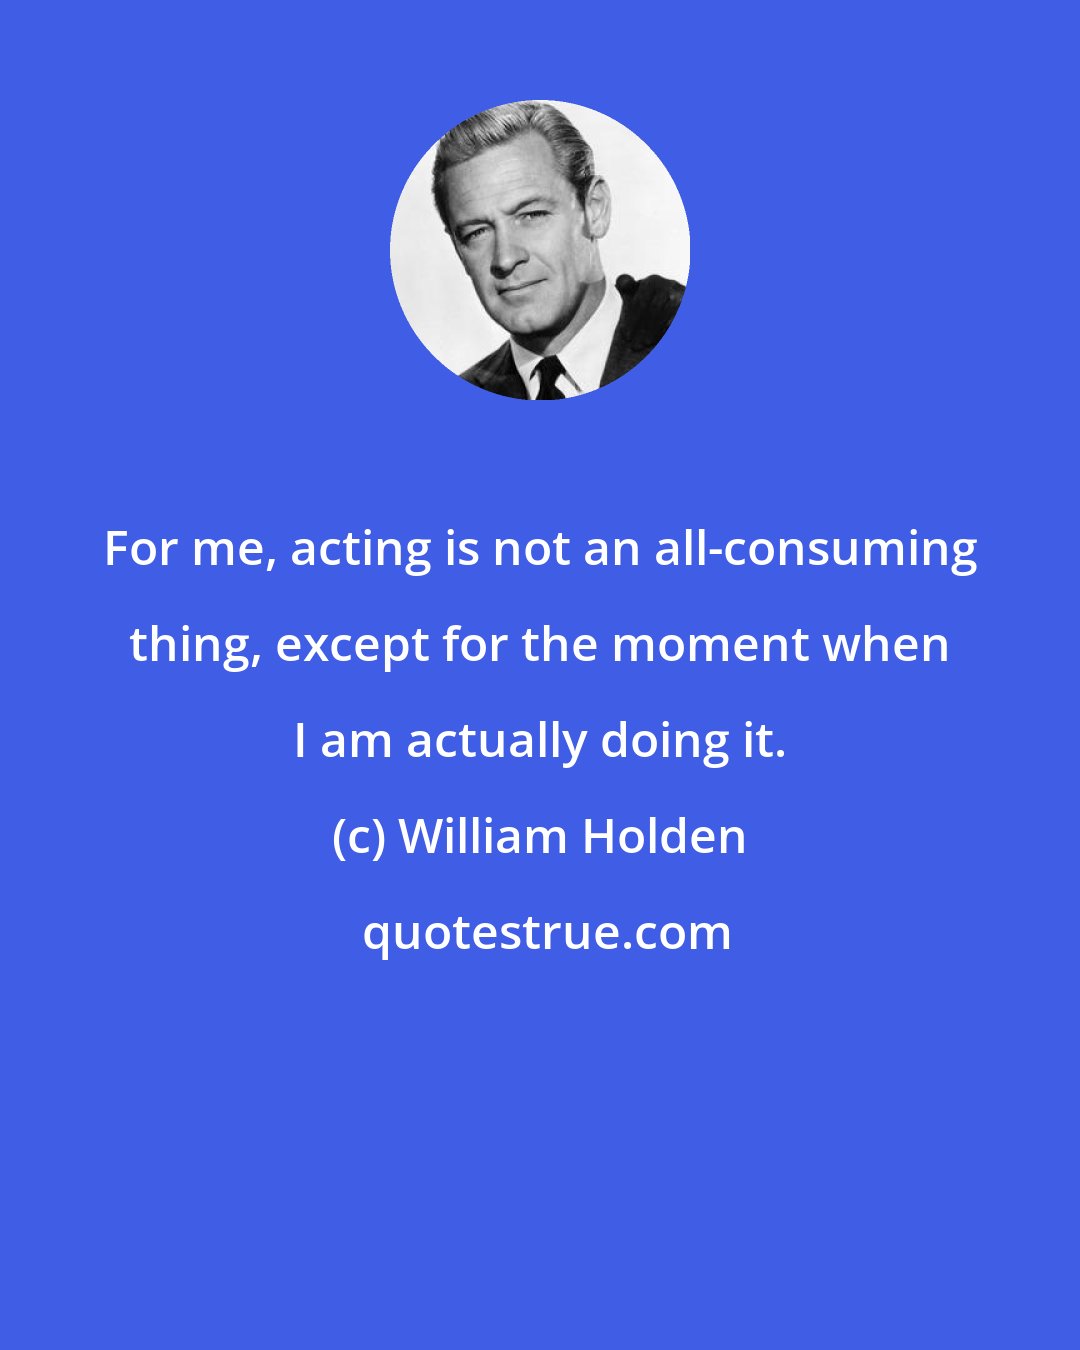 William Holden: For me, acting is not an all-consuming thing, except for the moment when I am actually doing it.